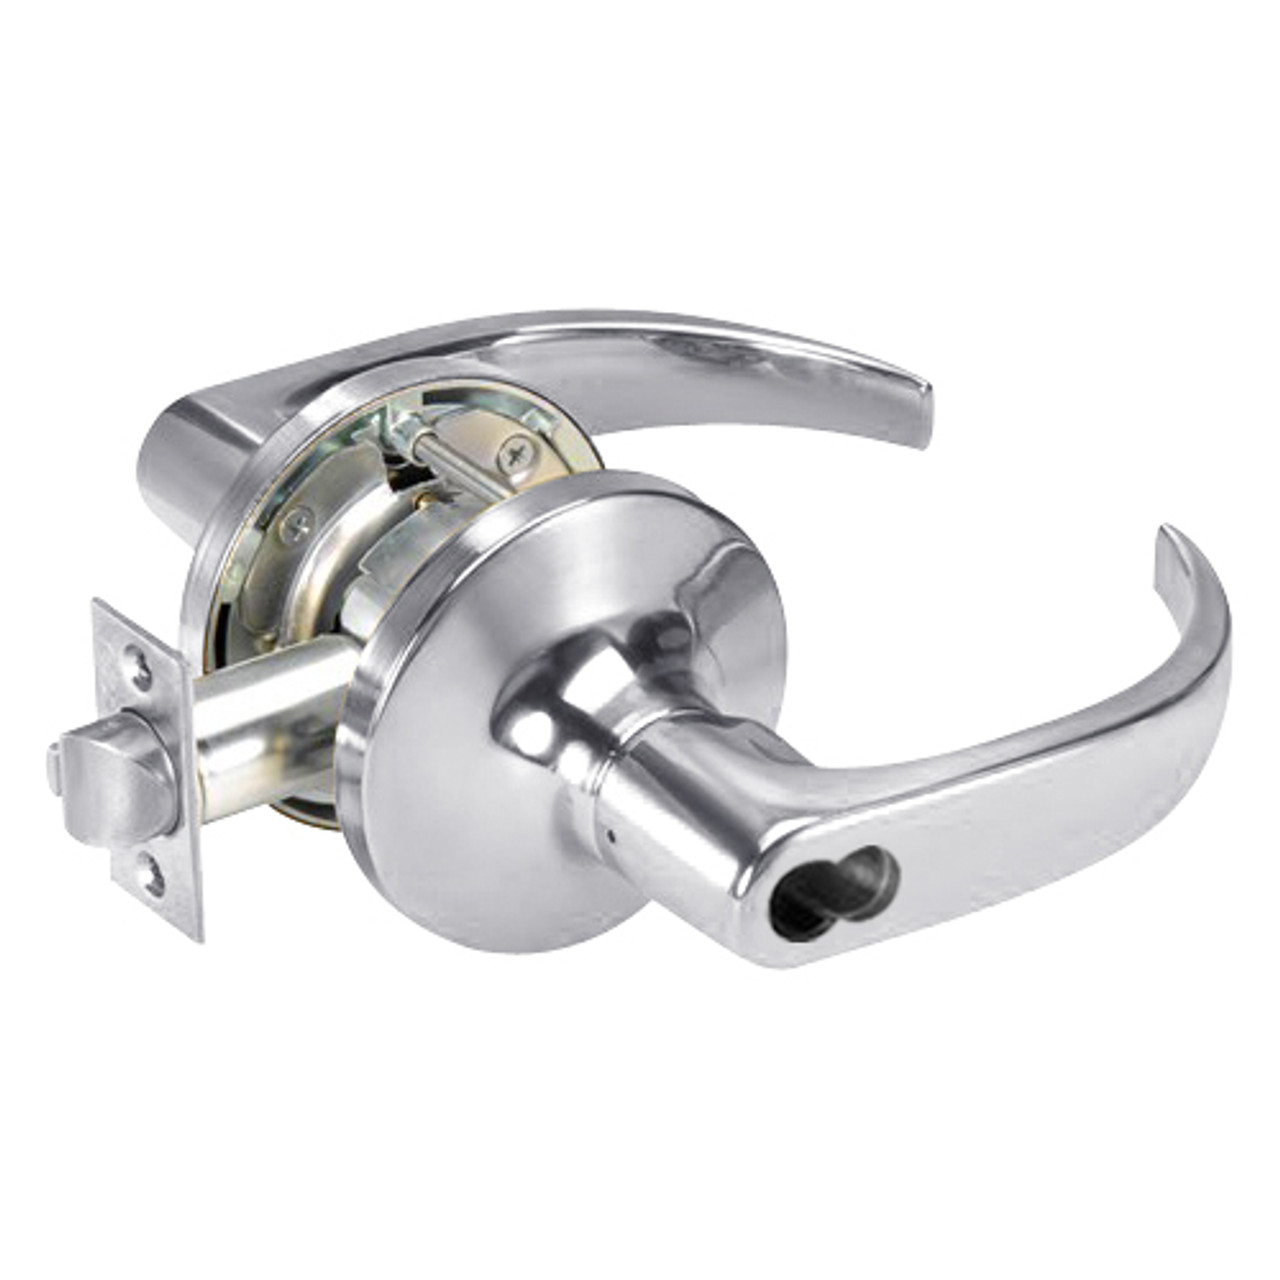 SI-PB5417LN-625 Yale 5400LN Series Double Cylinder Apartment or Exit Cylindrical Locks with Pacific Beach Lever Prepped for Schlage IC Core in Bright Chrome